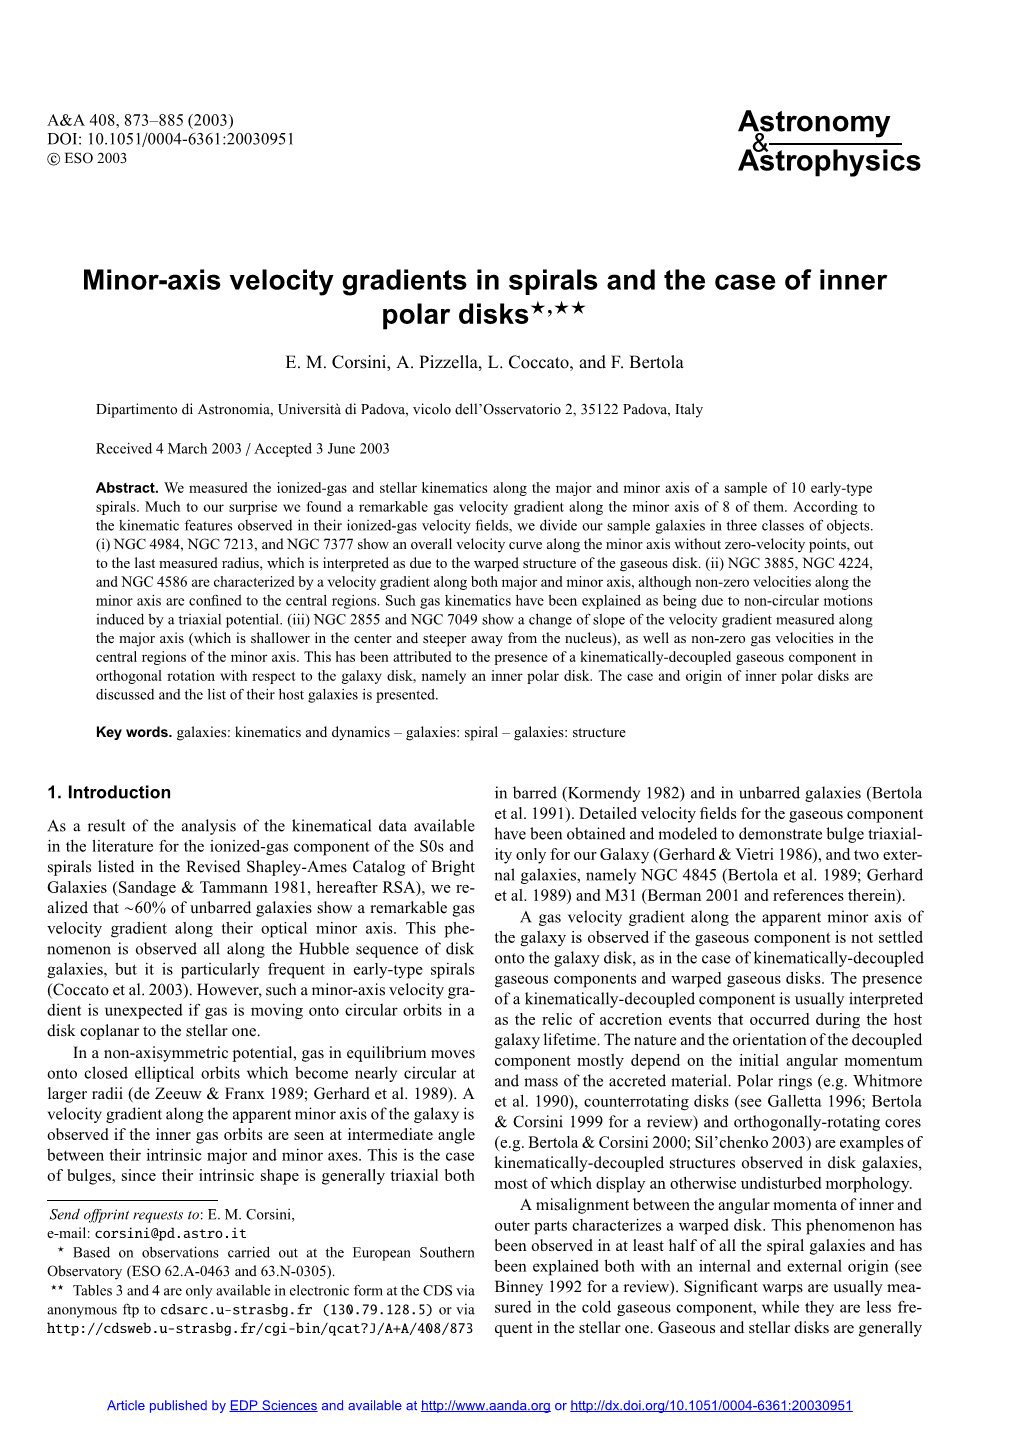 Minor-Axis Velocity Gradients in Spirals and the Case of Inner Polar Disks?,??